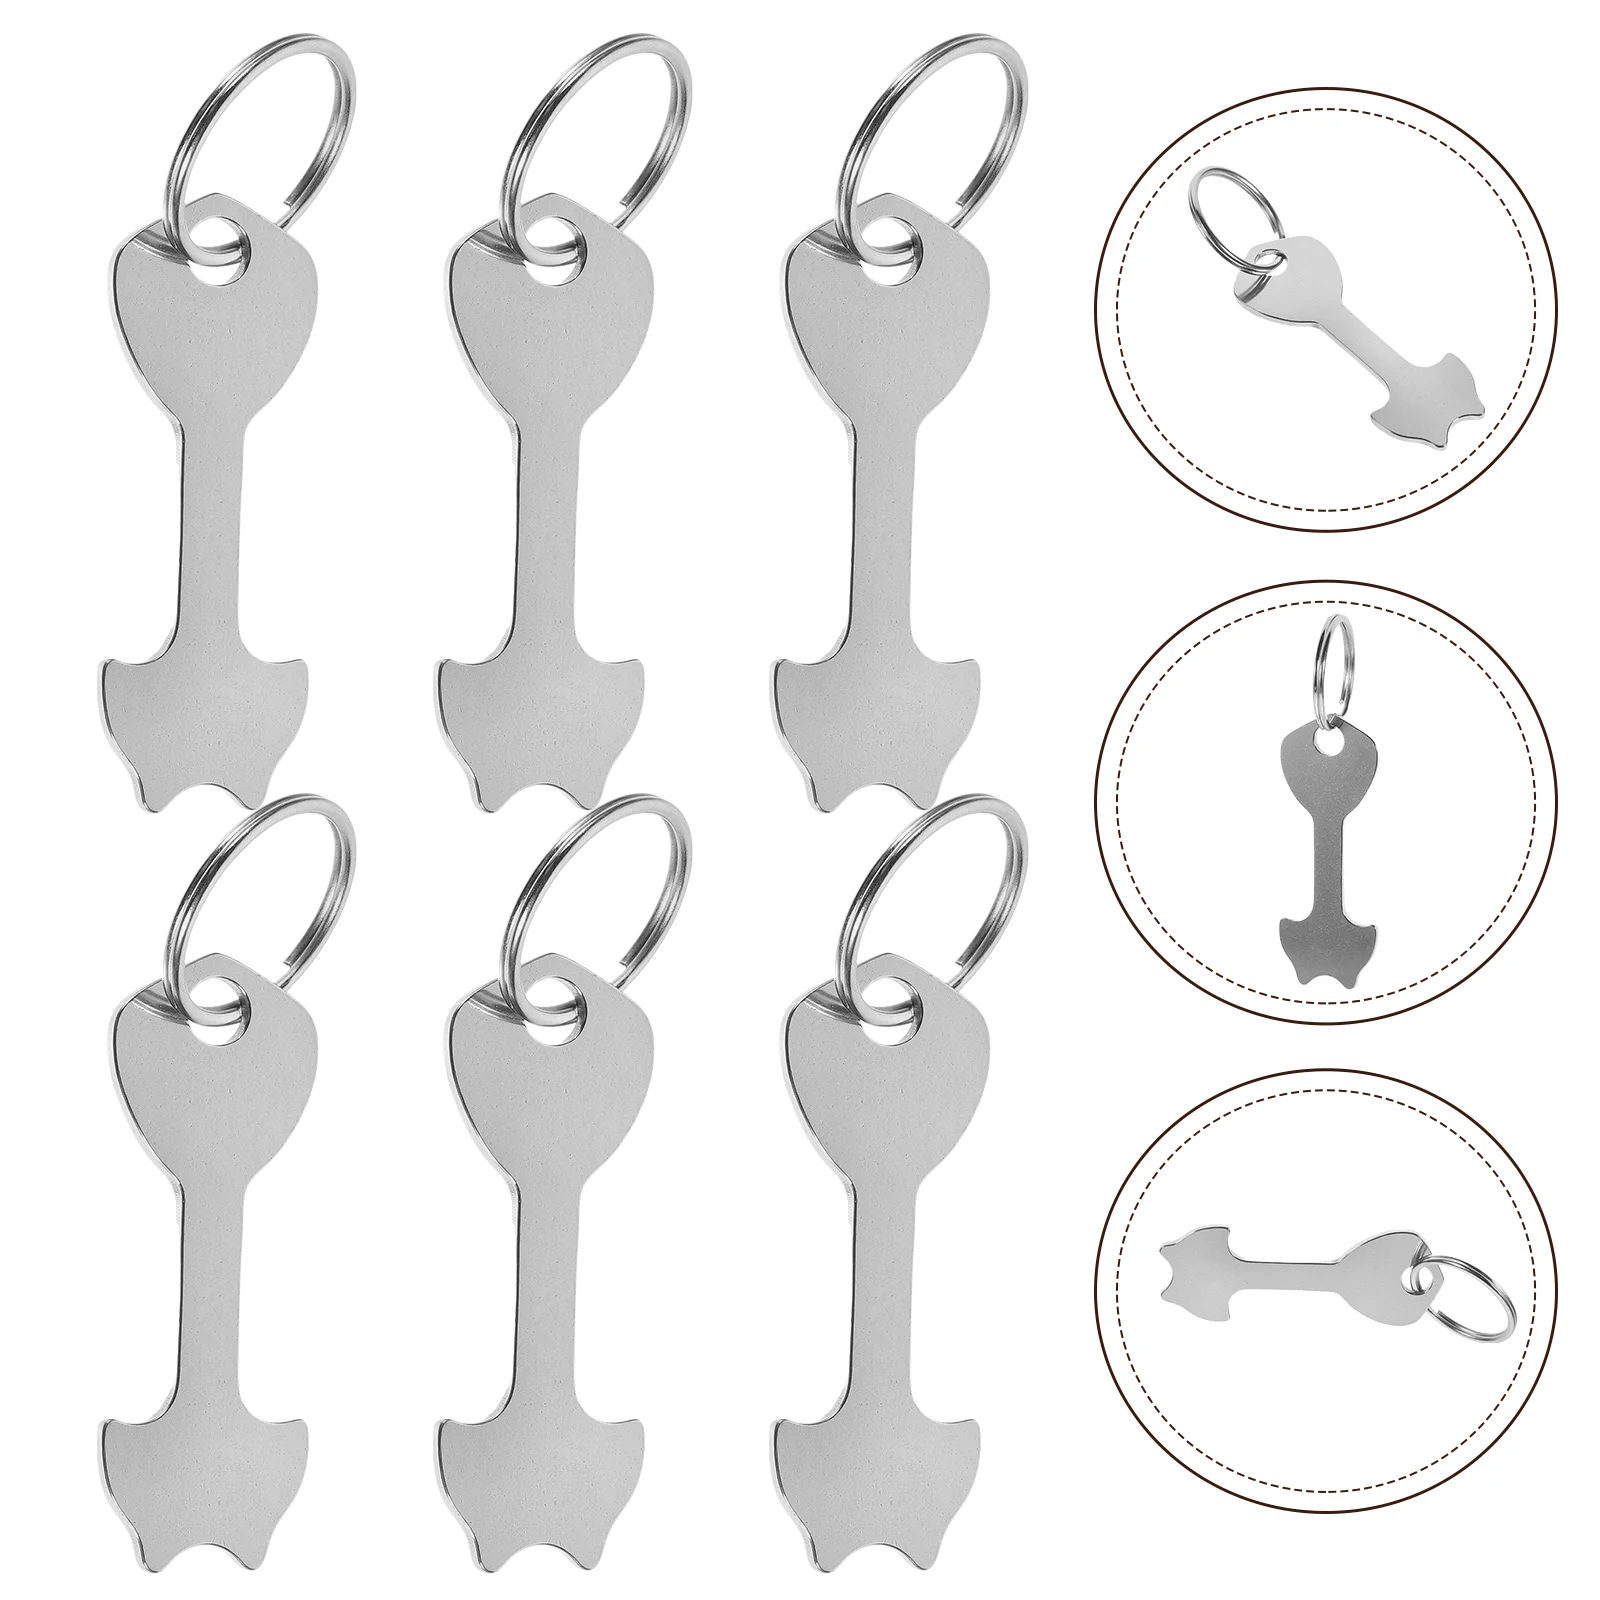 

6 Pcs Cart Token Trolley Remover Pendant Supplies Go Portable Tokens Key Ring Keyrings Accessory Coin